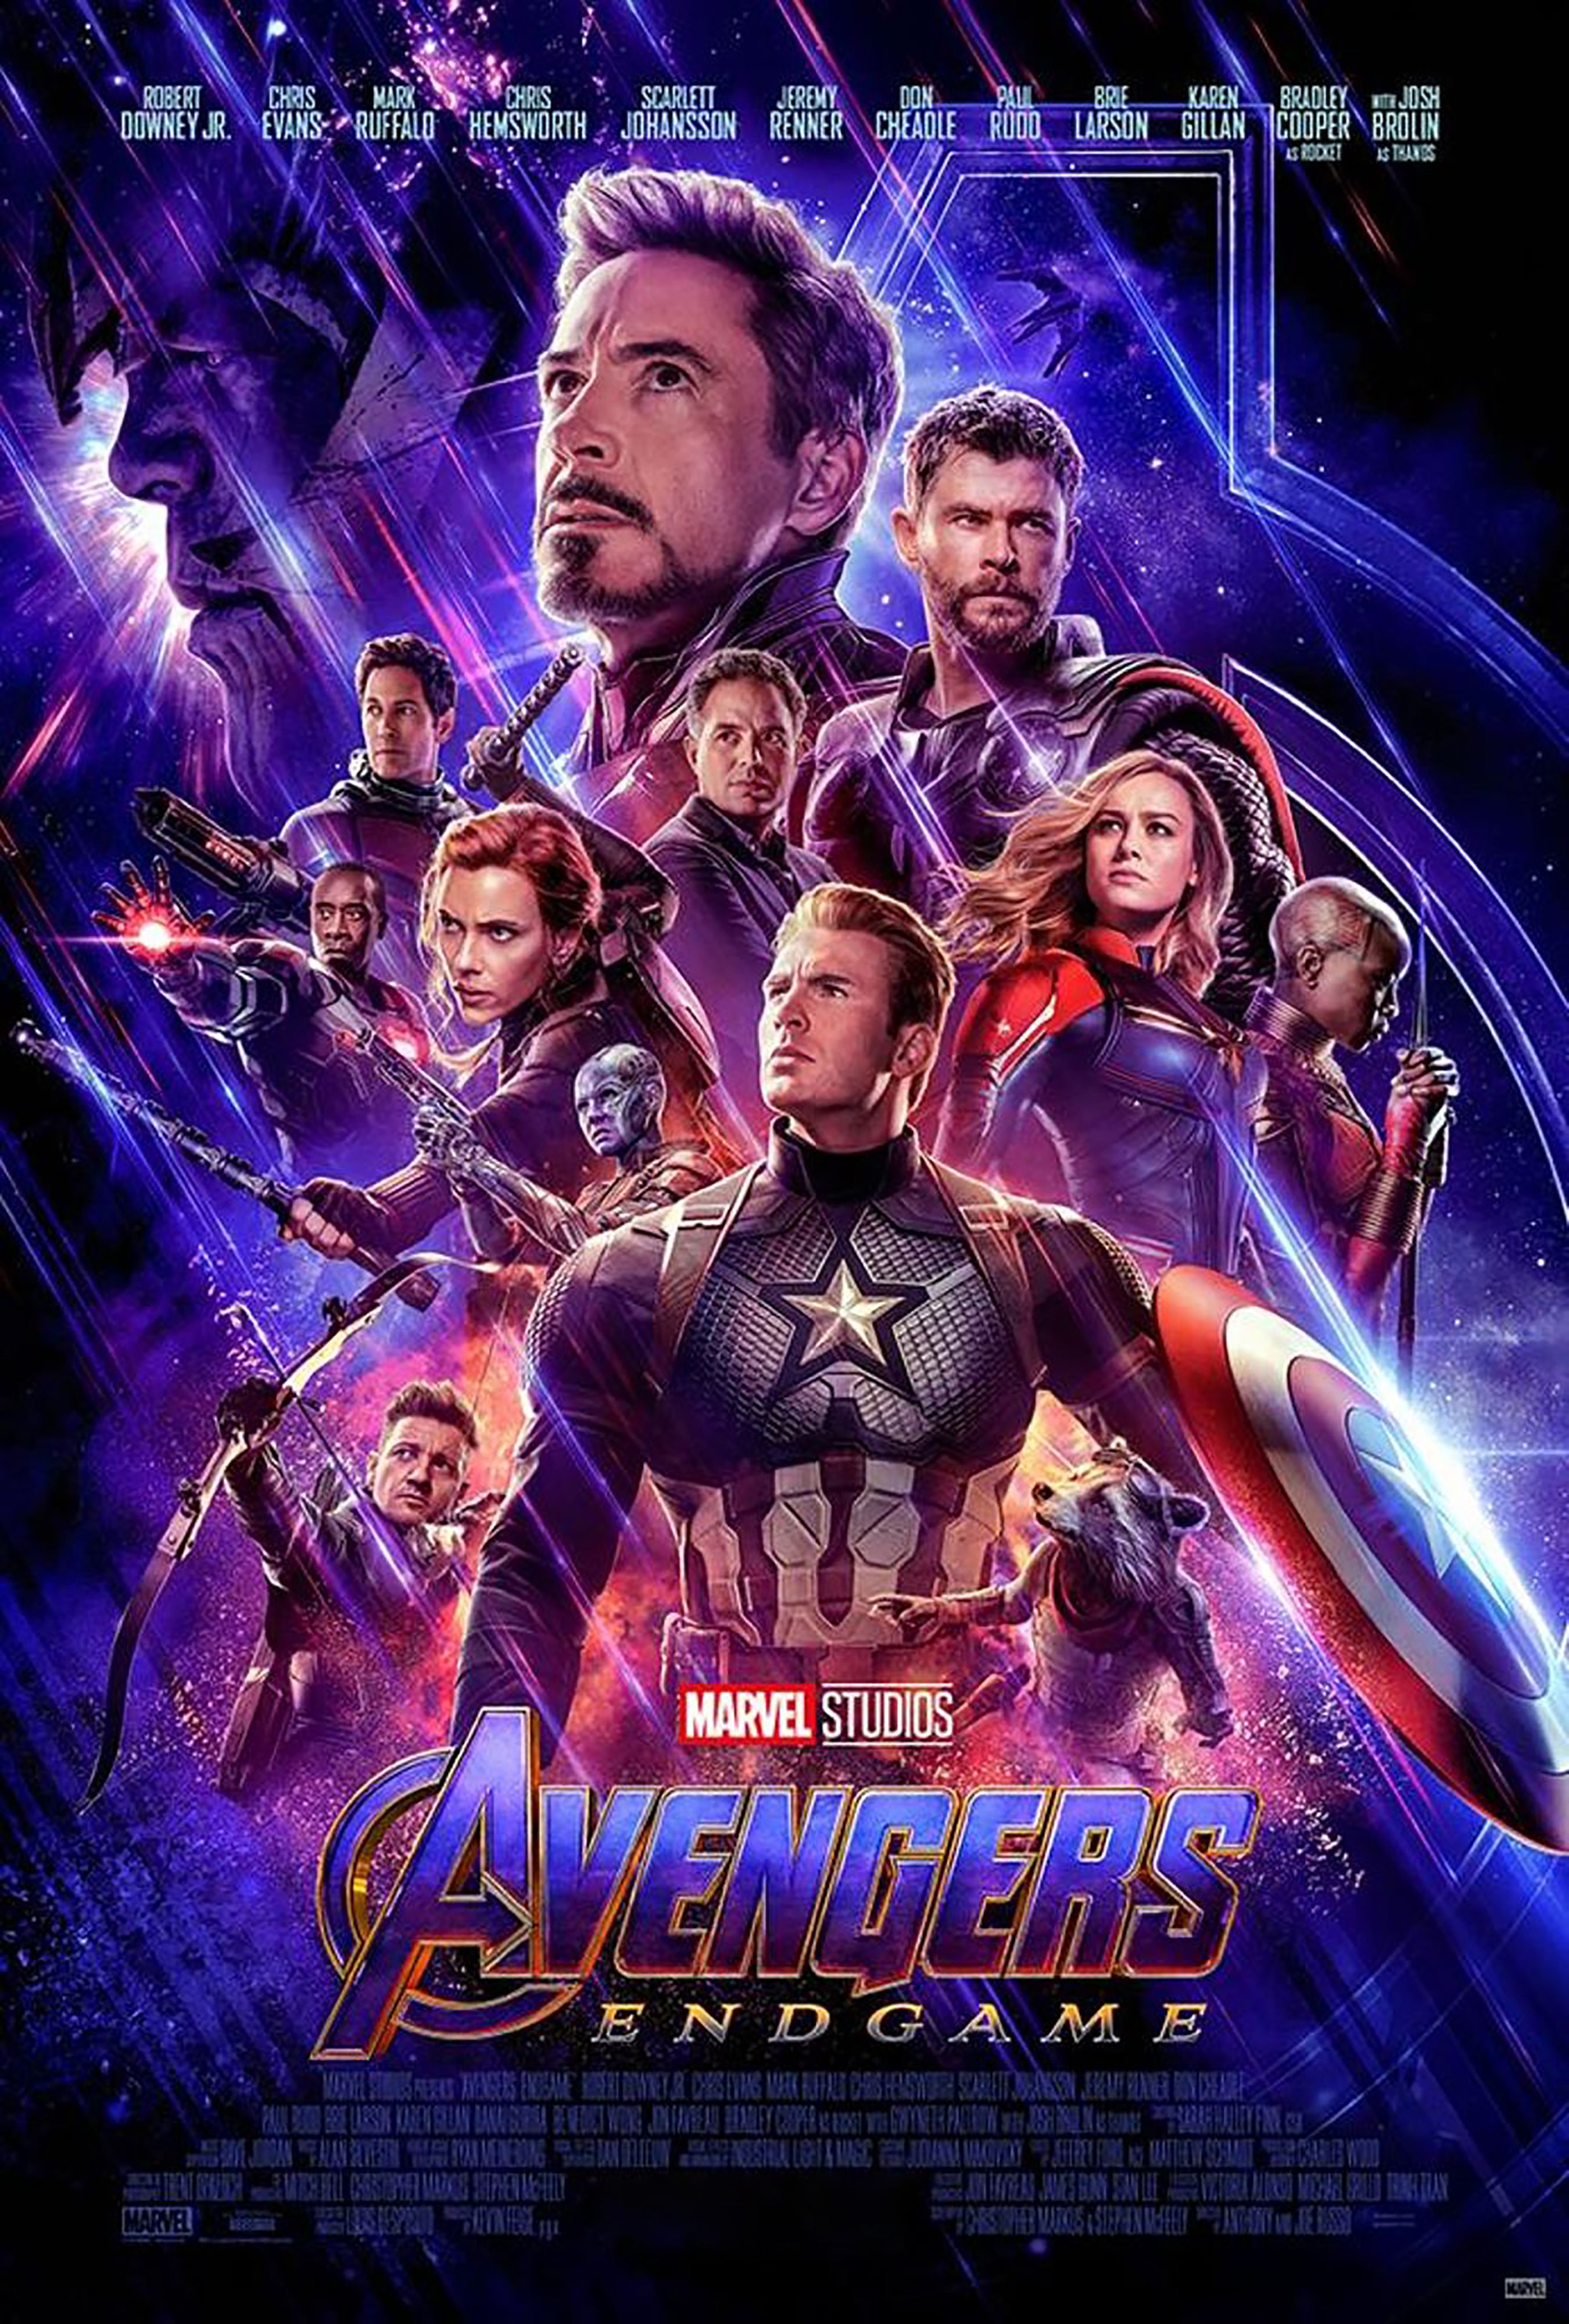 Book your tickets for Avengers: Endgame (Hindi) at Shree Talkies (Shree) in  Agra at April 29th 2019, 11:20 pm on Justickets